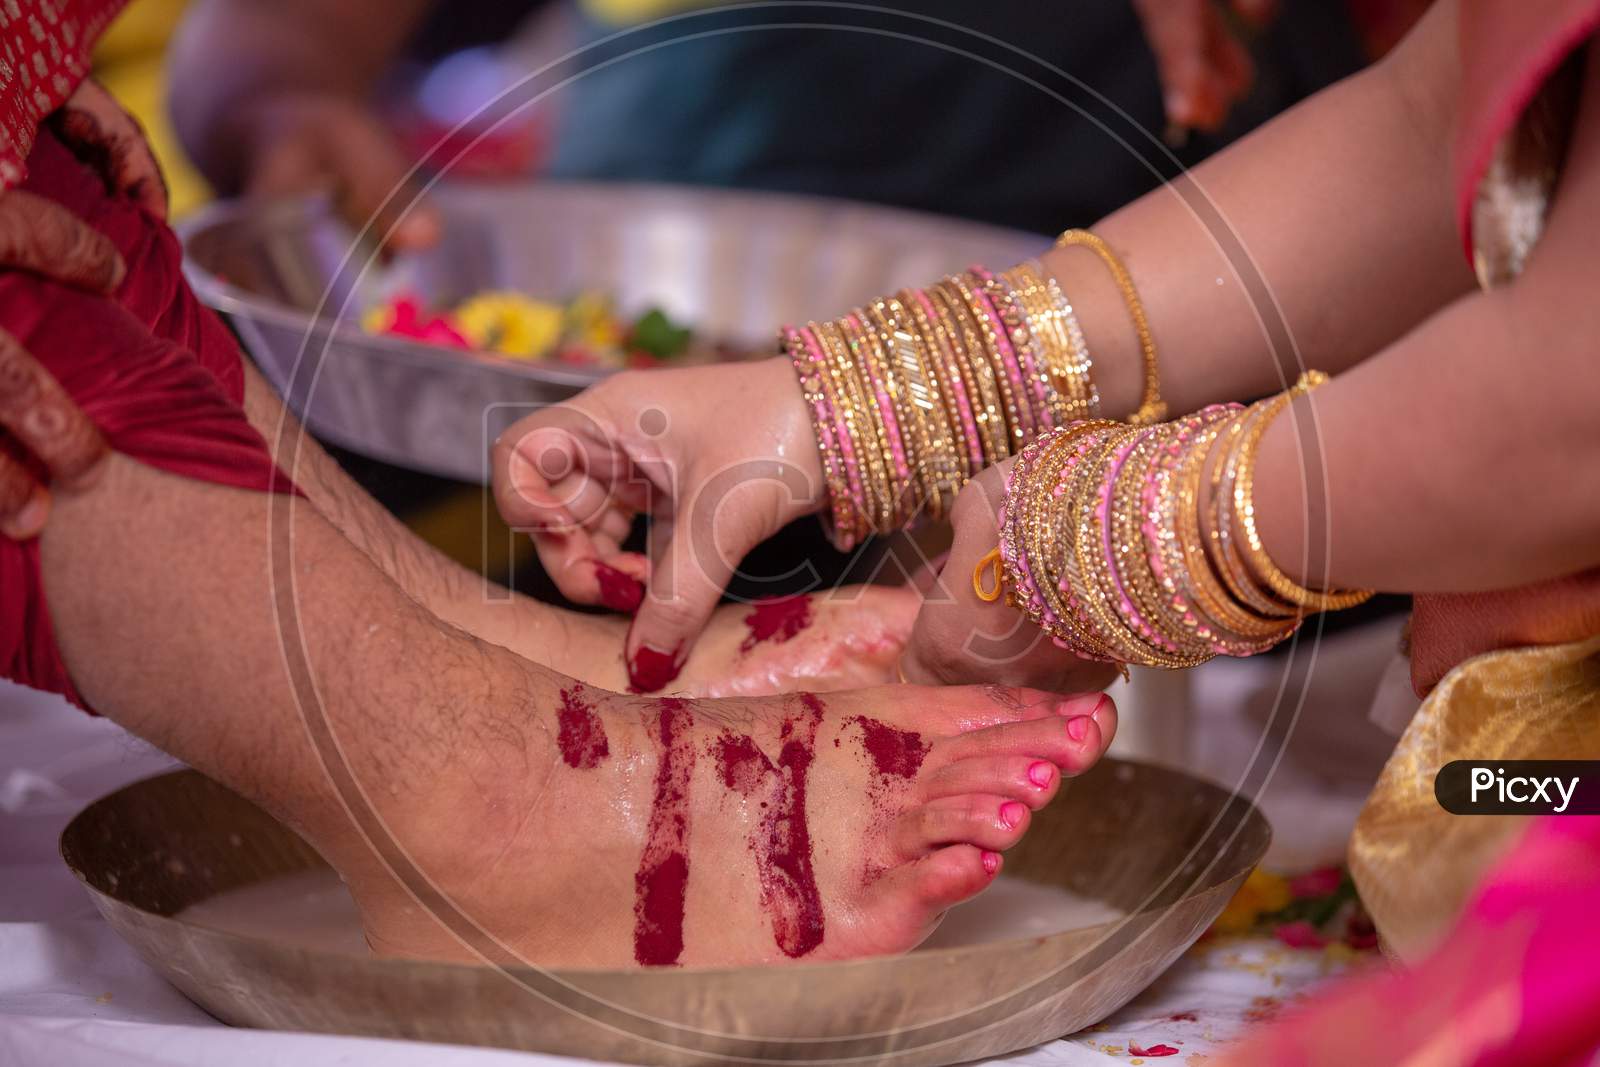 South Indian Wedding Rituals With Groom  At an Wedding Ceremony